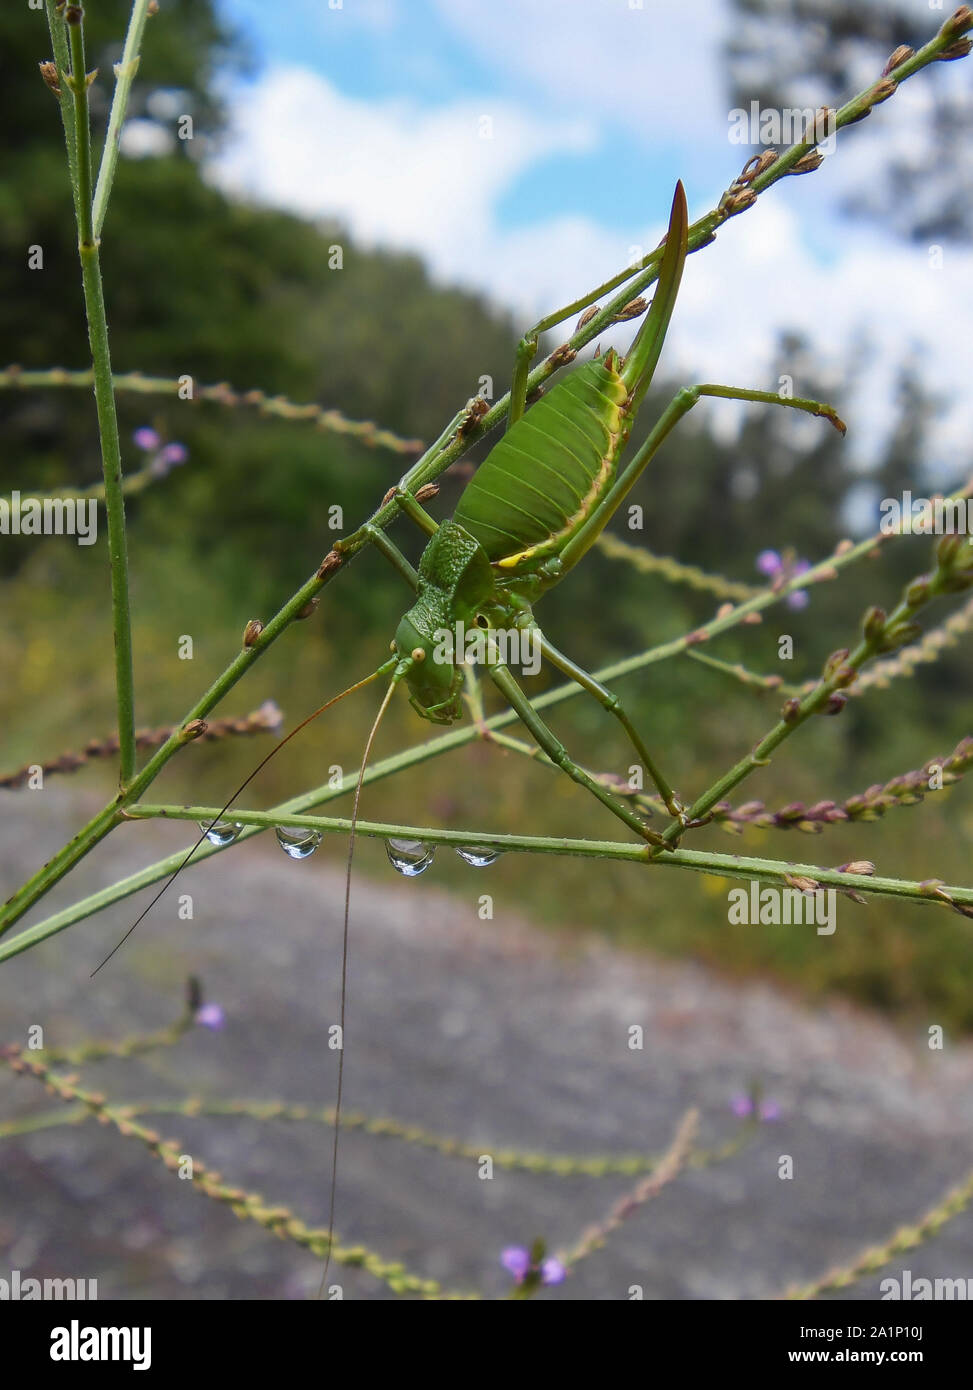 Close-up of a green grasshopper on a roadside plant Stock Photo